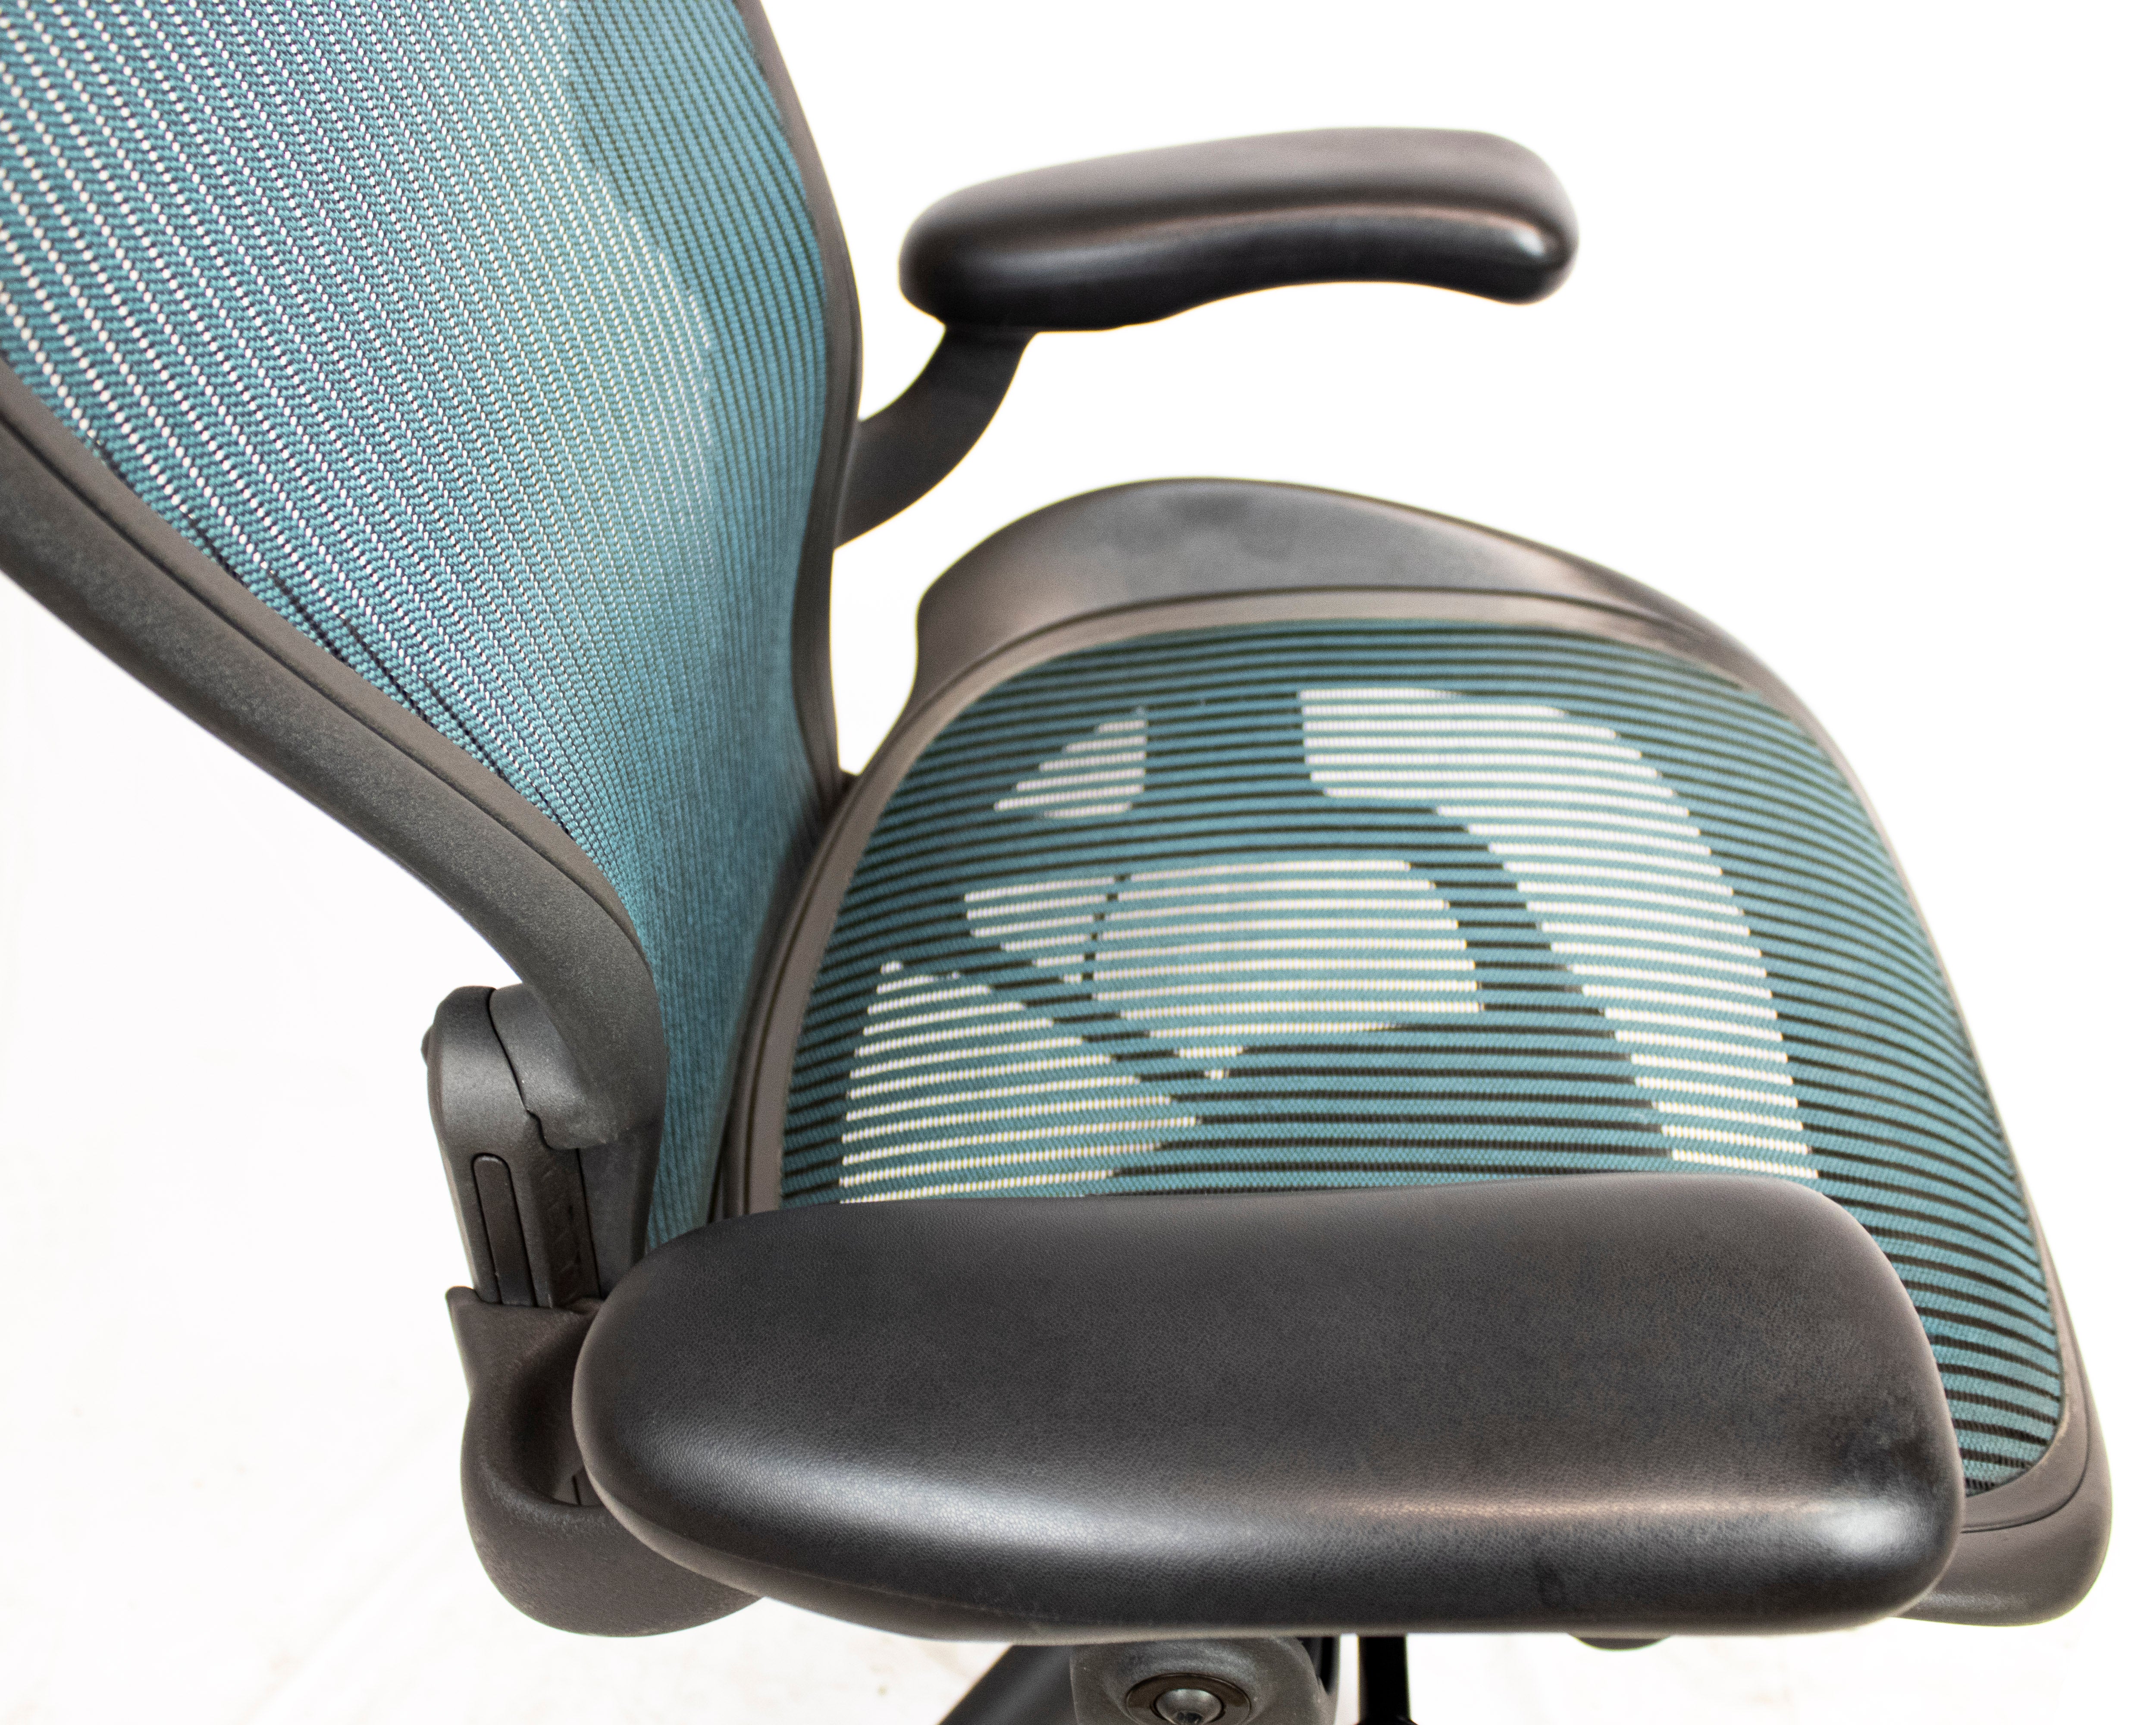 Herman Miller Aeron Task Chair "B"- Fixed Arms - Green Mesh  -Preowned